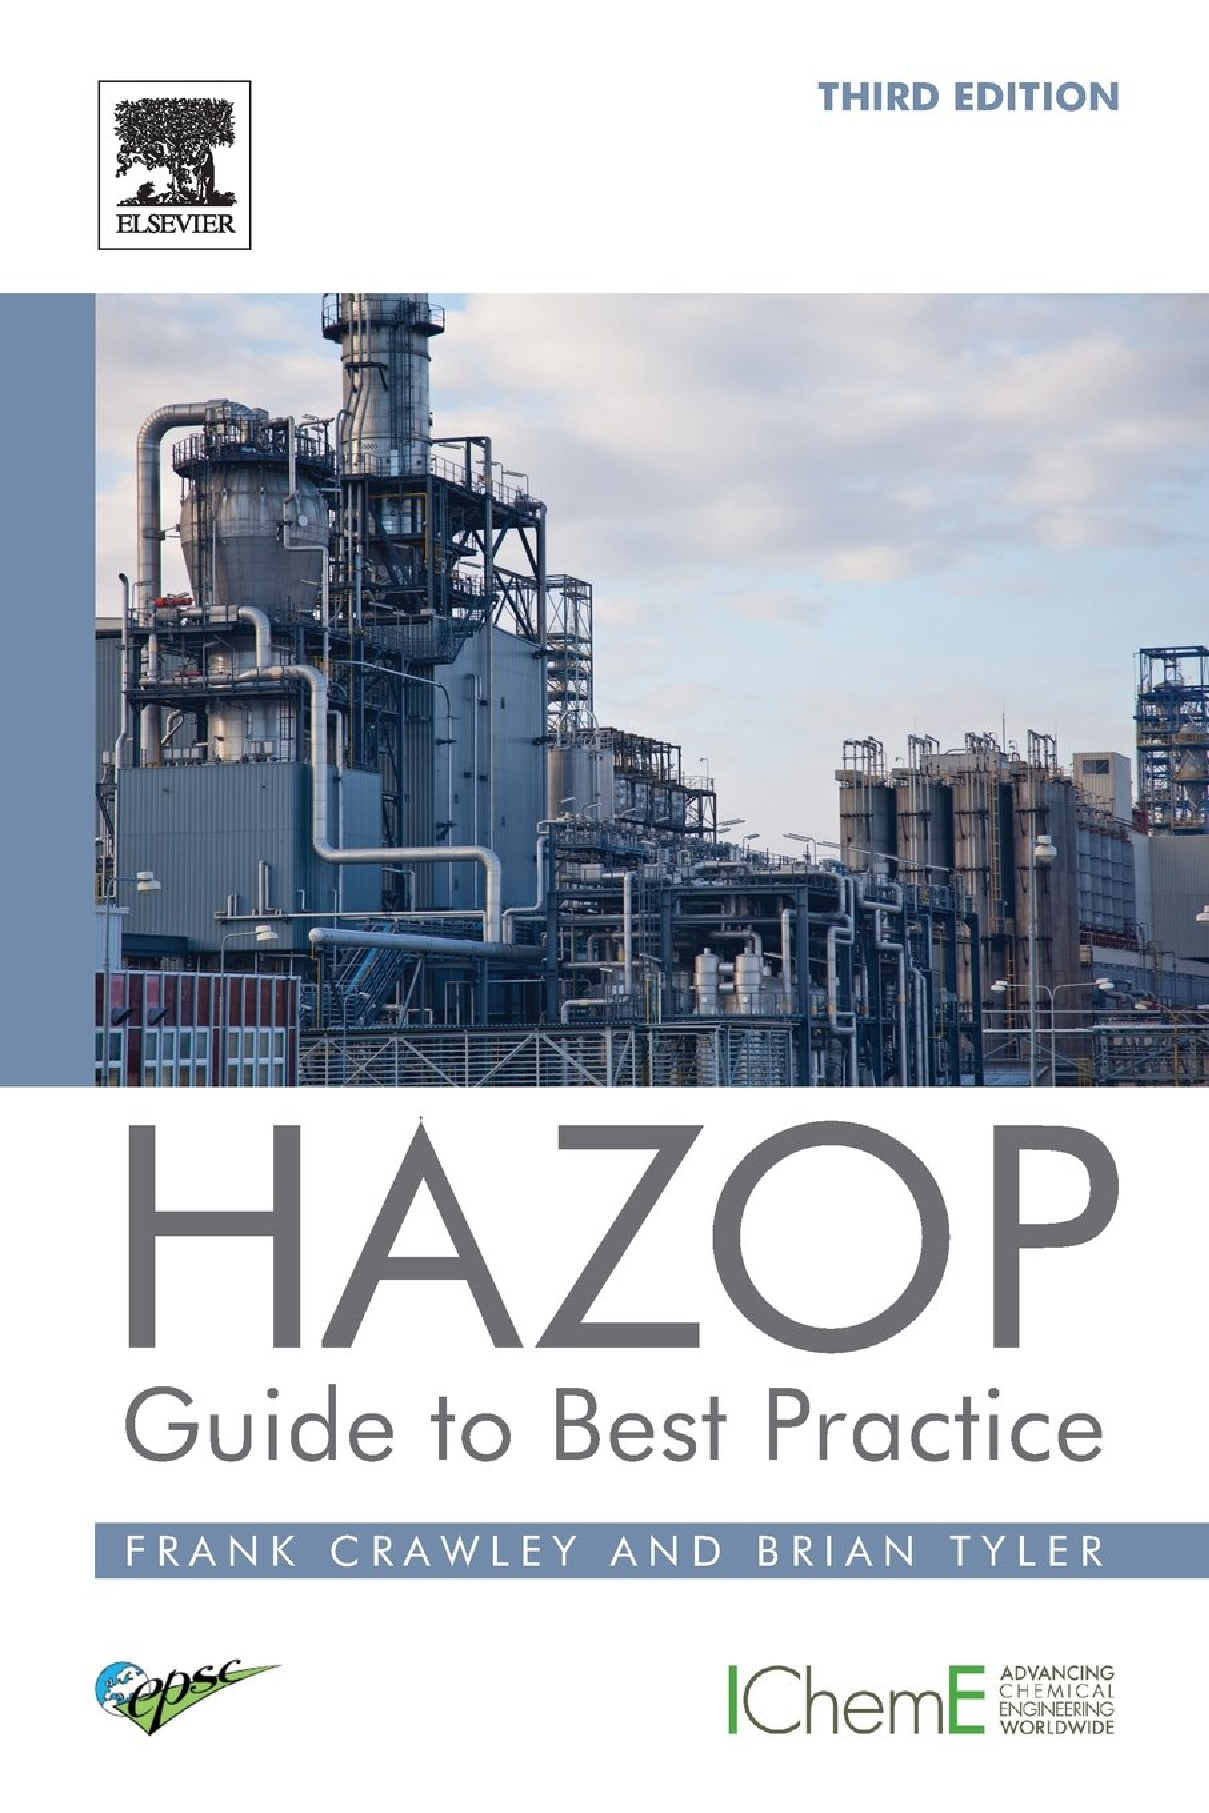 HAZOP guide to best practice guidelines to best practice for the process and chemical industries